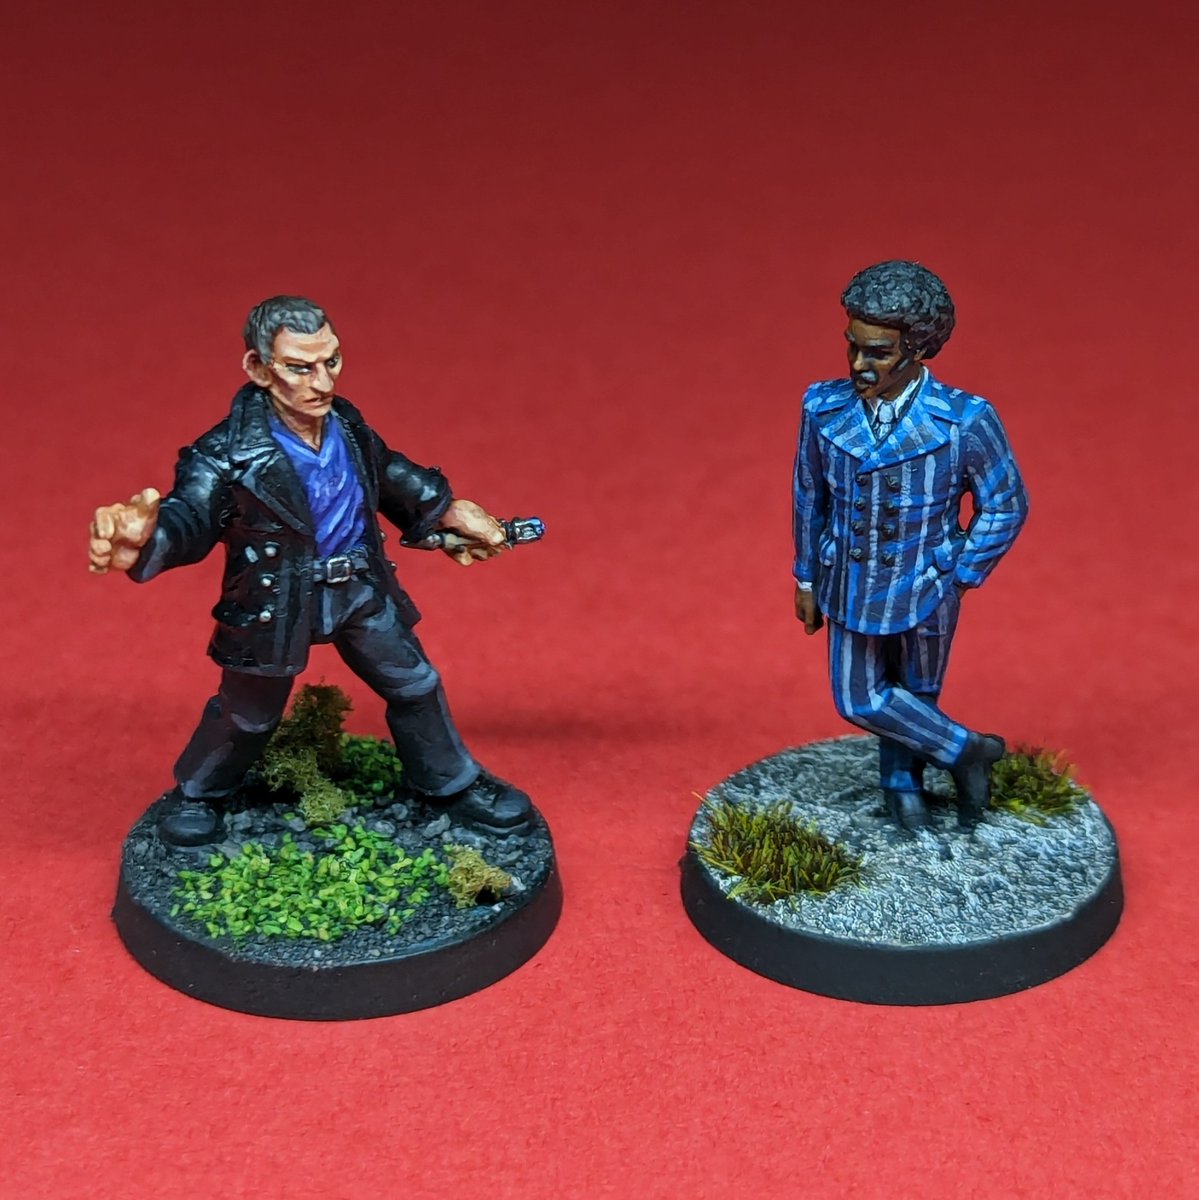 The Doctor (series 1) meets The Doctor (season 1)

#DOCTORWHO #miniatures #minipainting